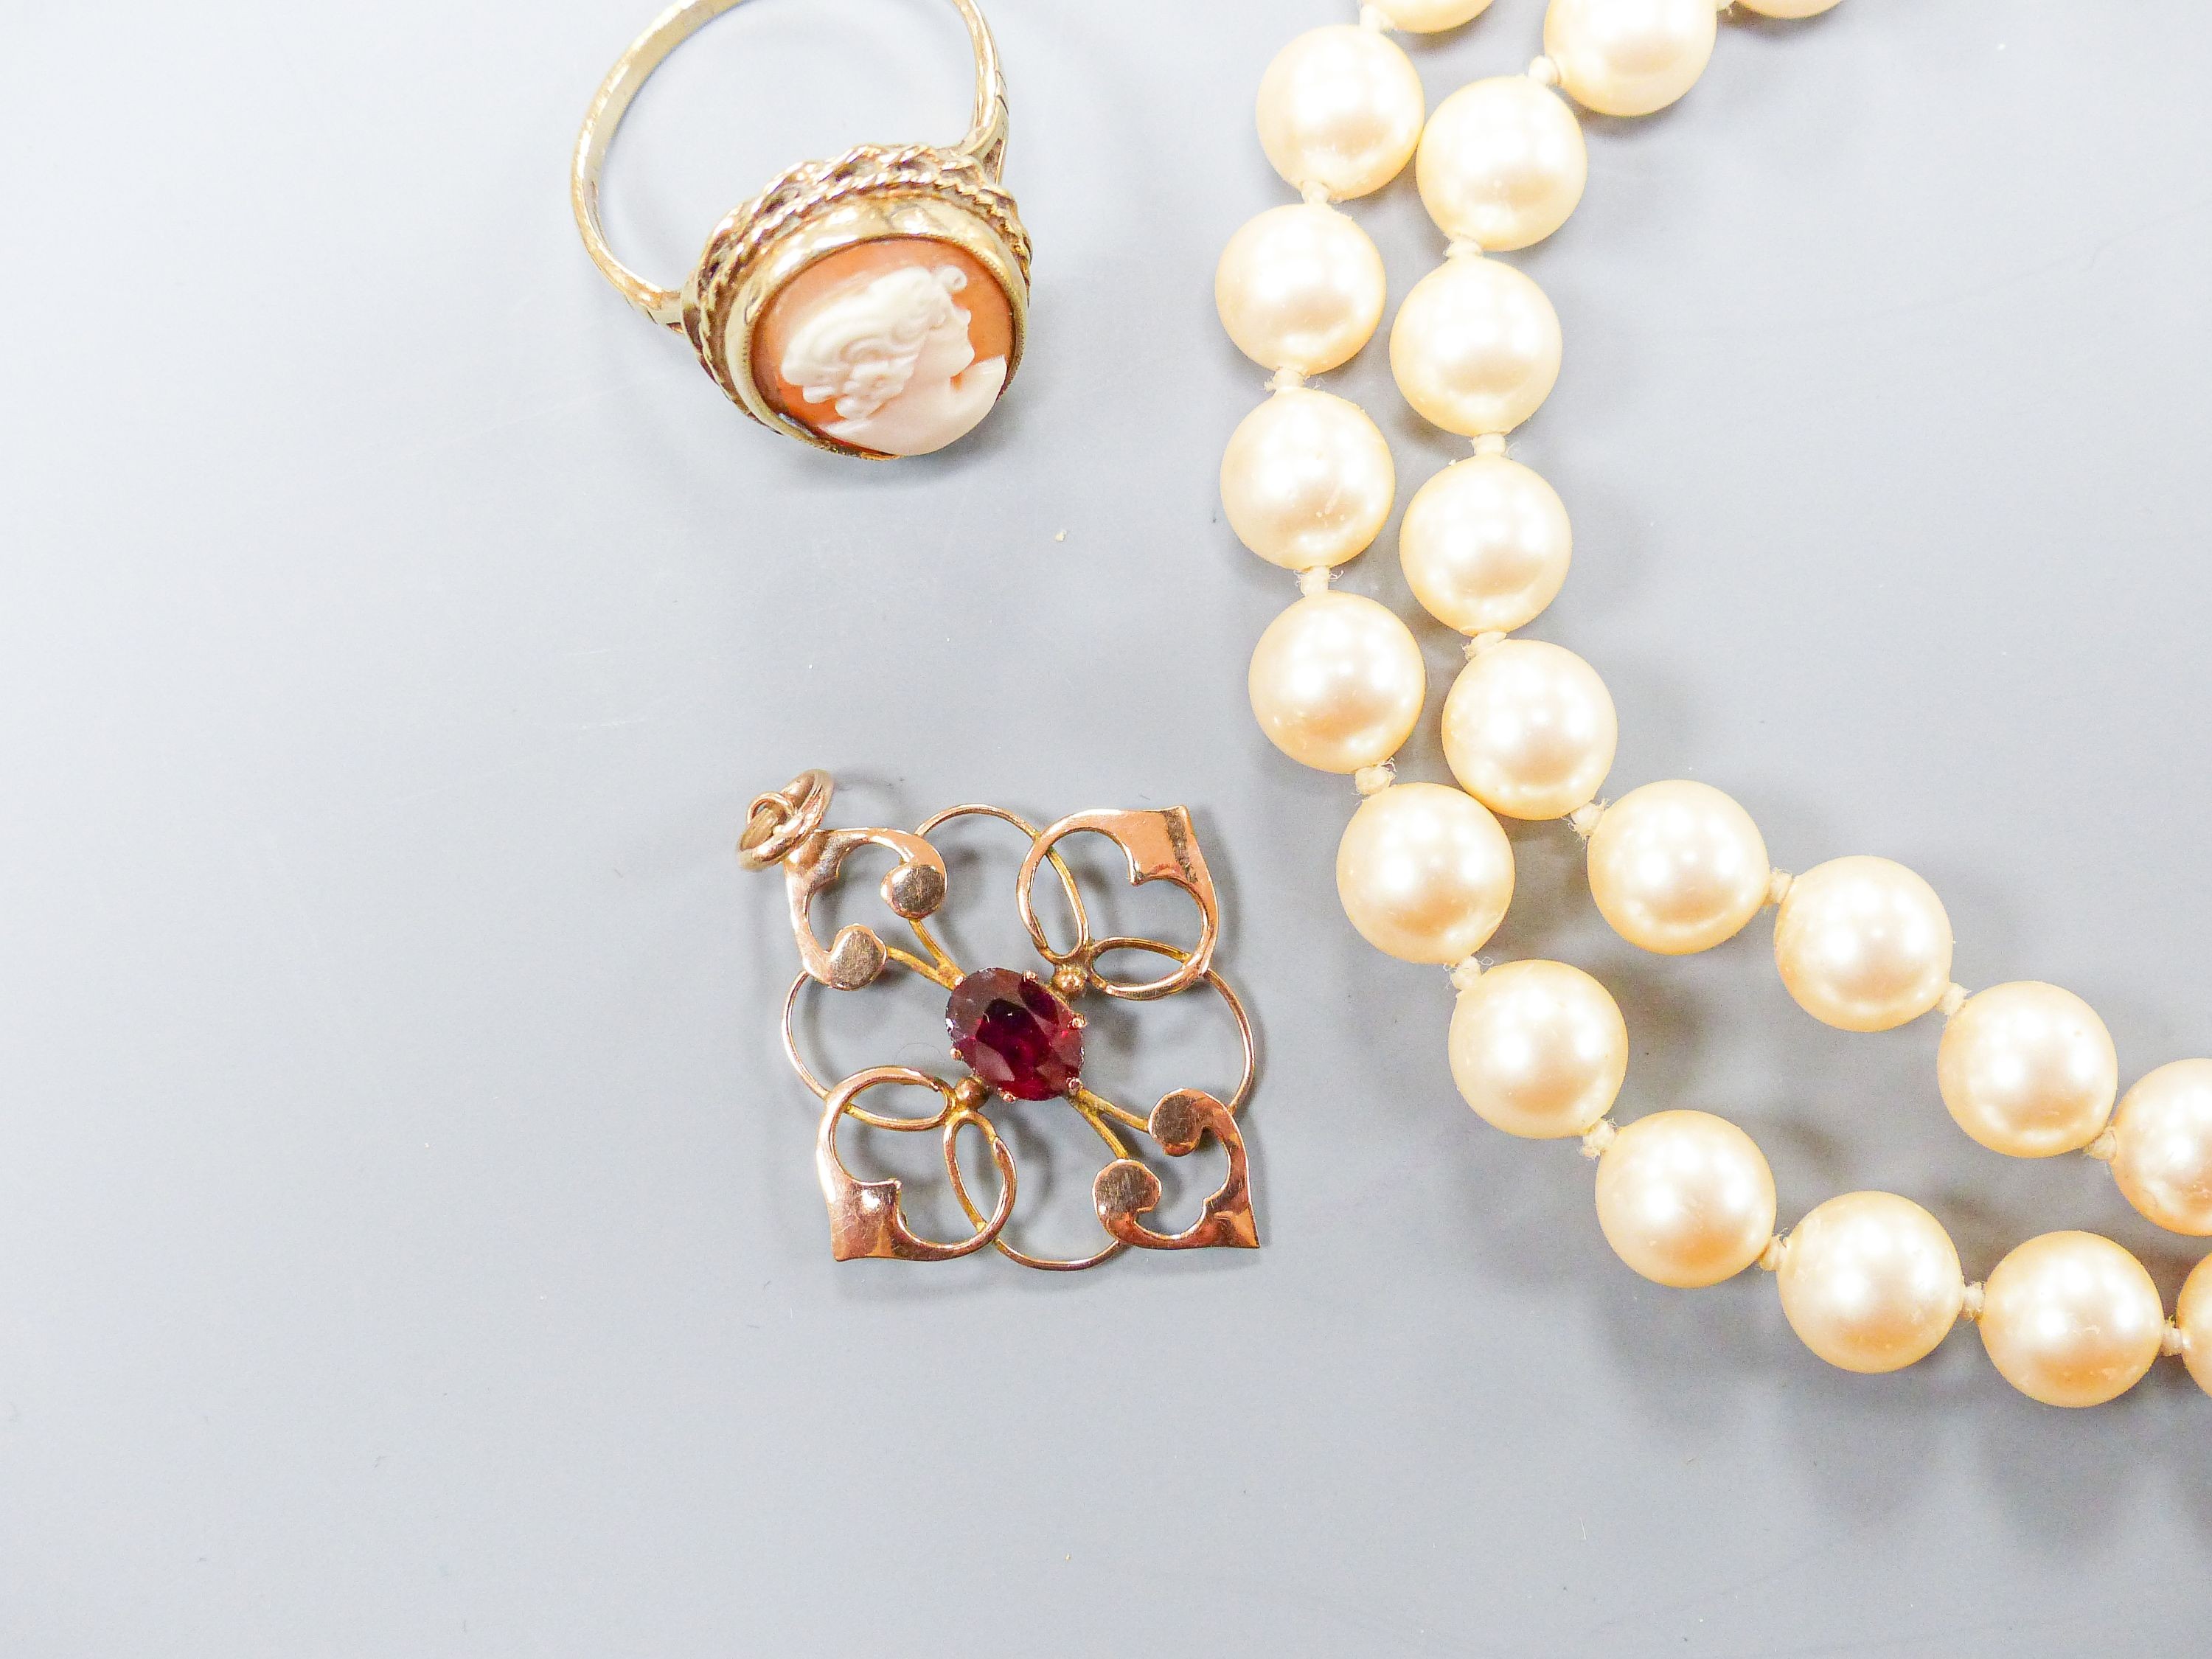 A 9ct gold and cameo shell oval ring, a 9ct and garnet set pendant and a simulated pearl necklace.